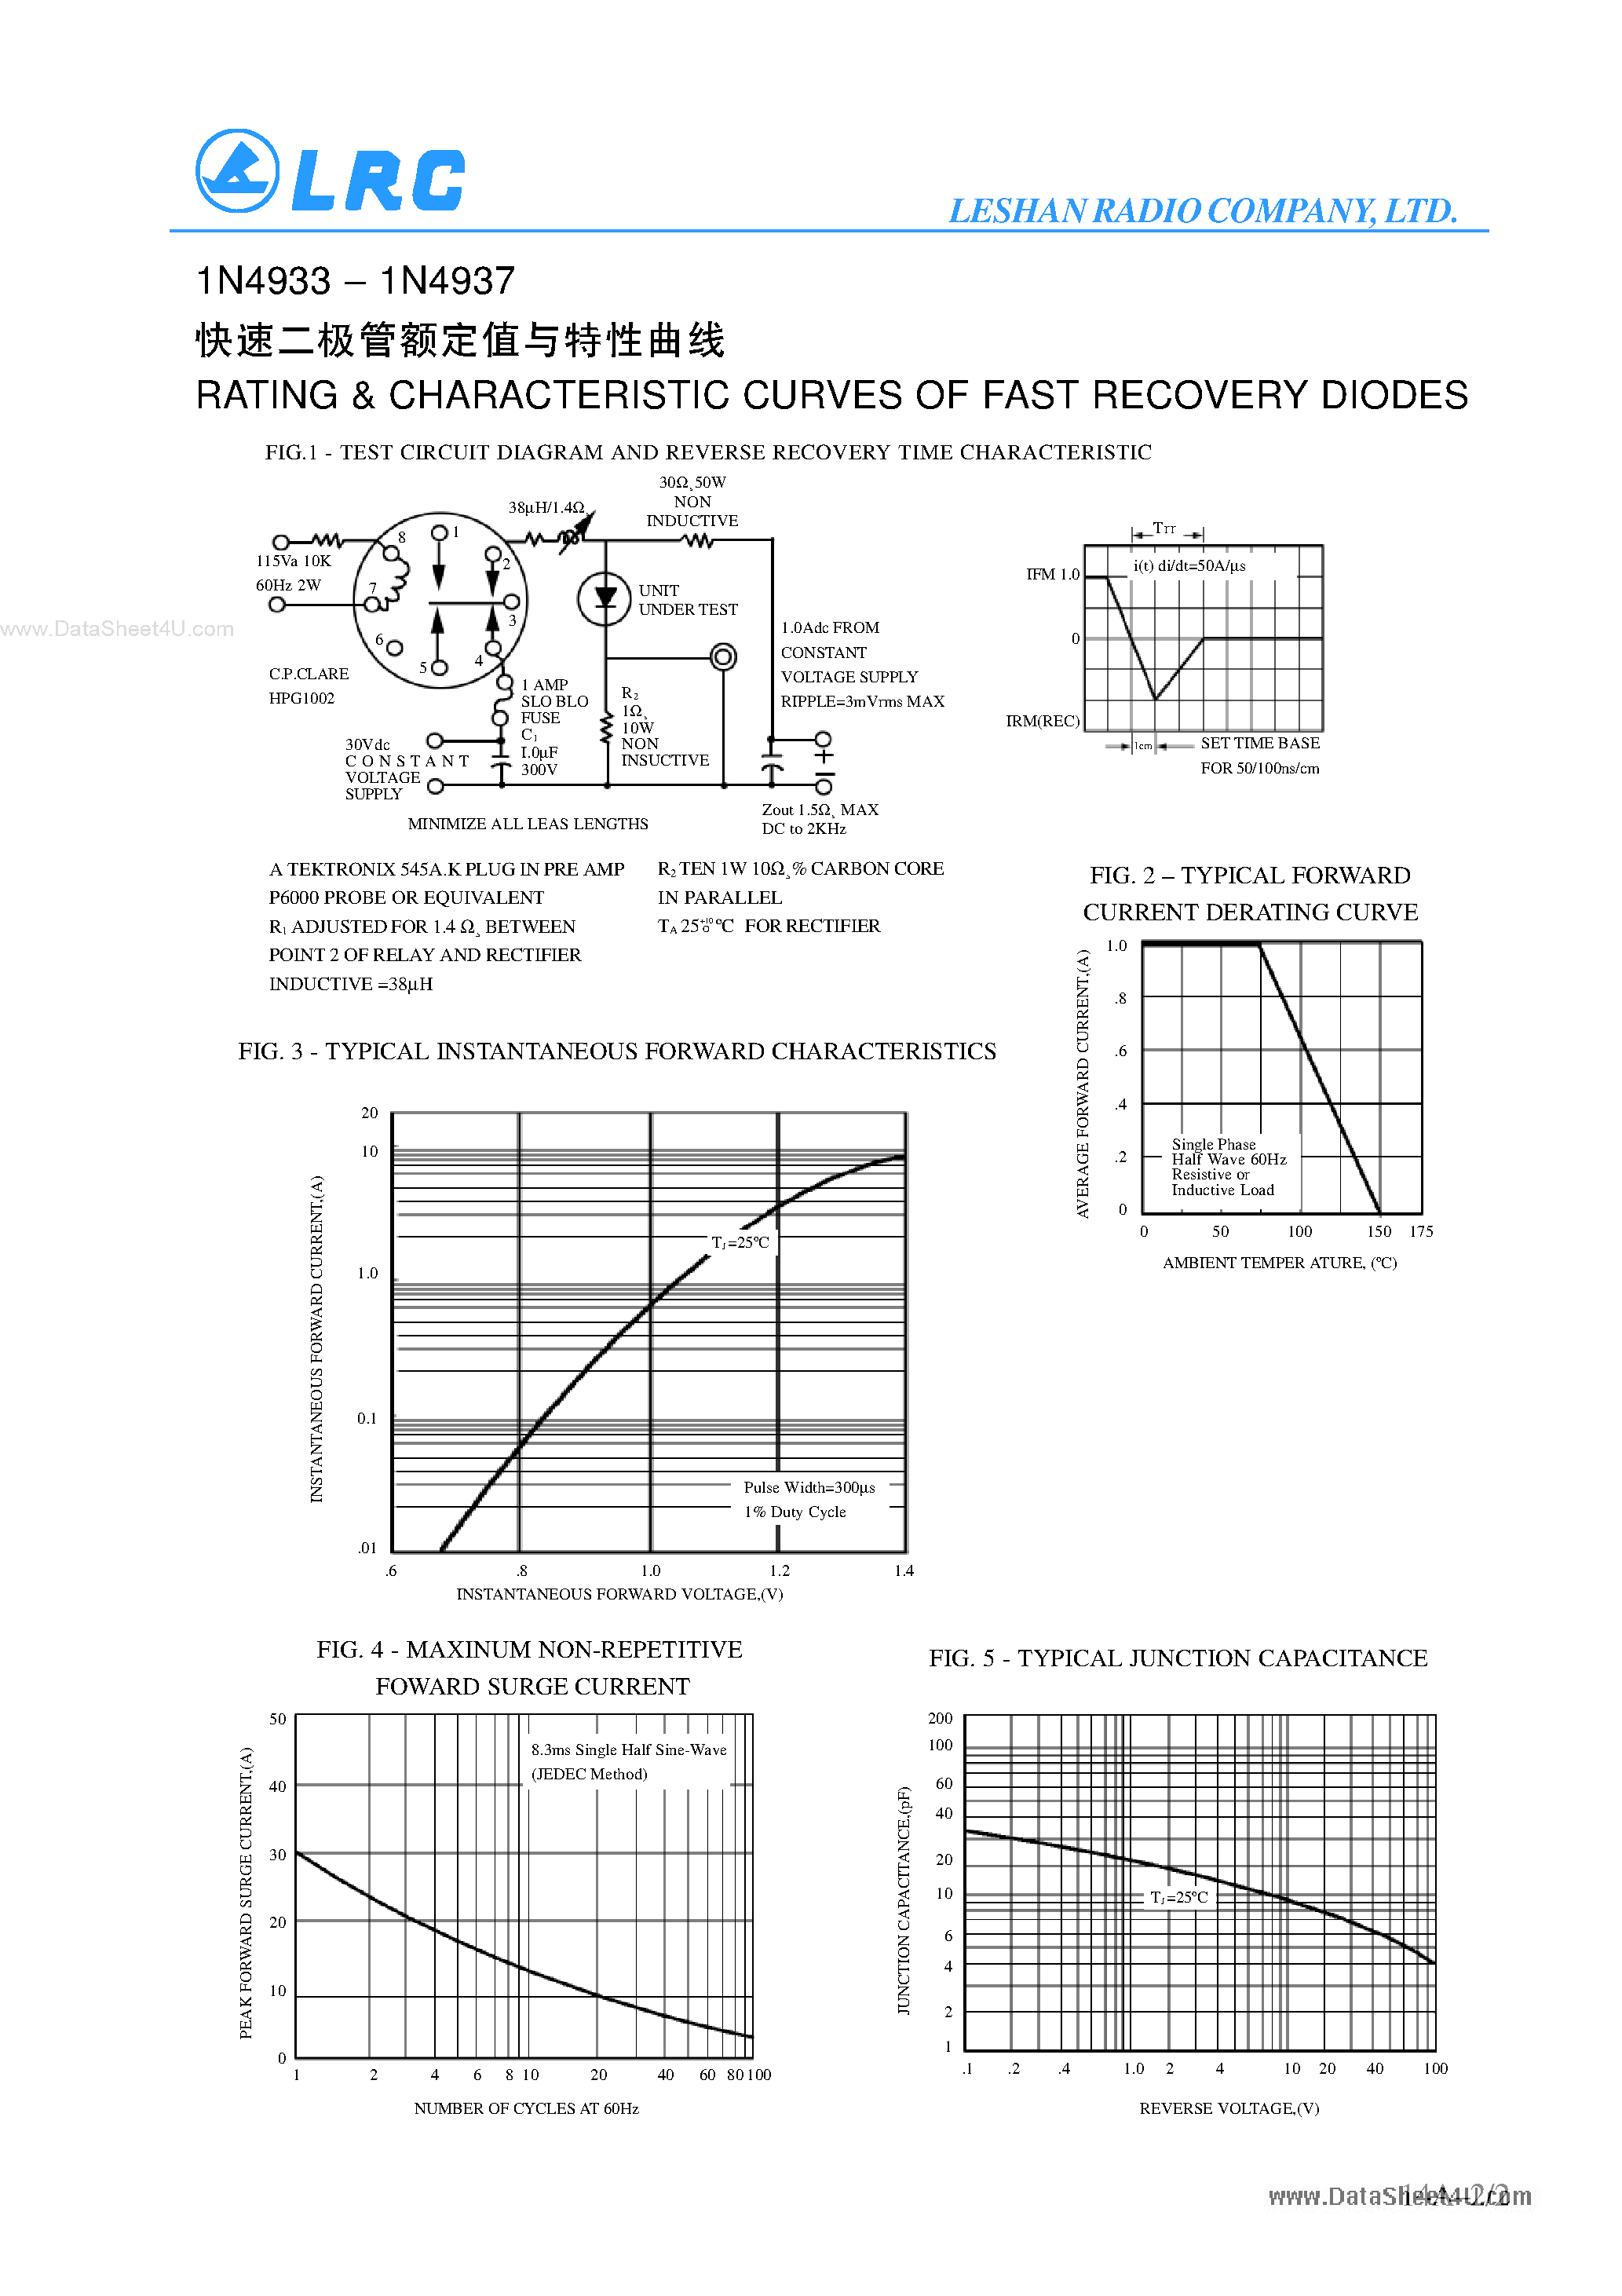 Datasheet IN4933E - (IN4933E - IN4937E) 1A FAST RECOVERY DIODES page 2